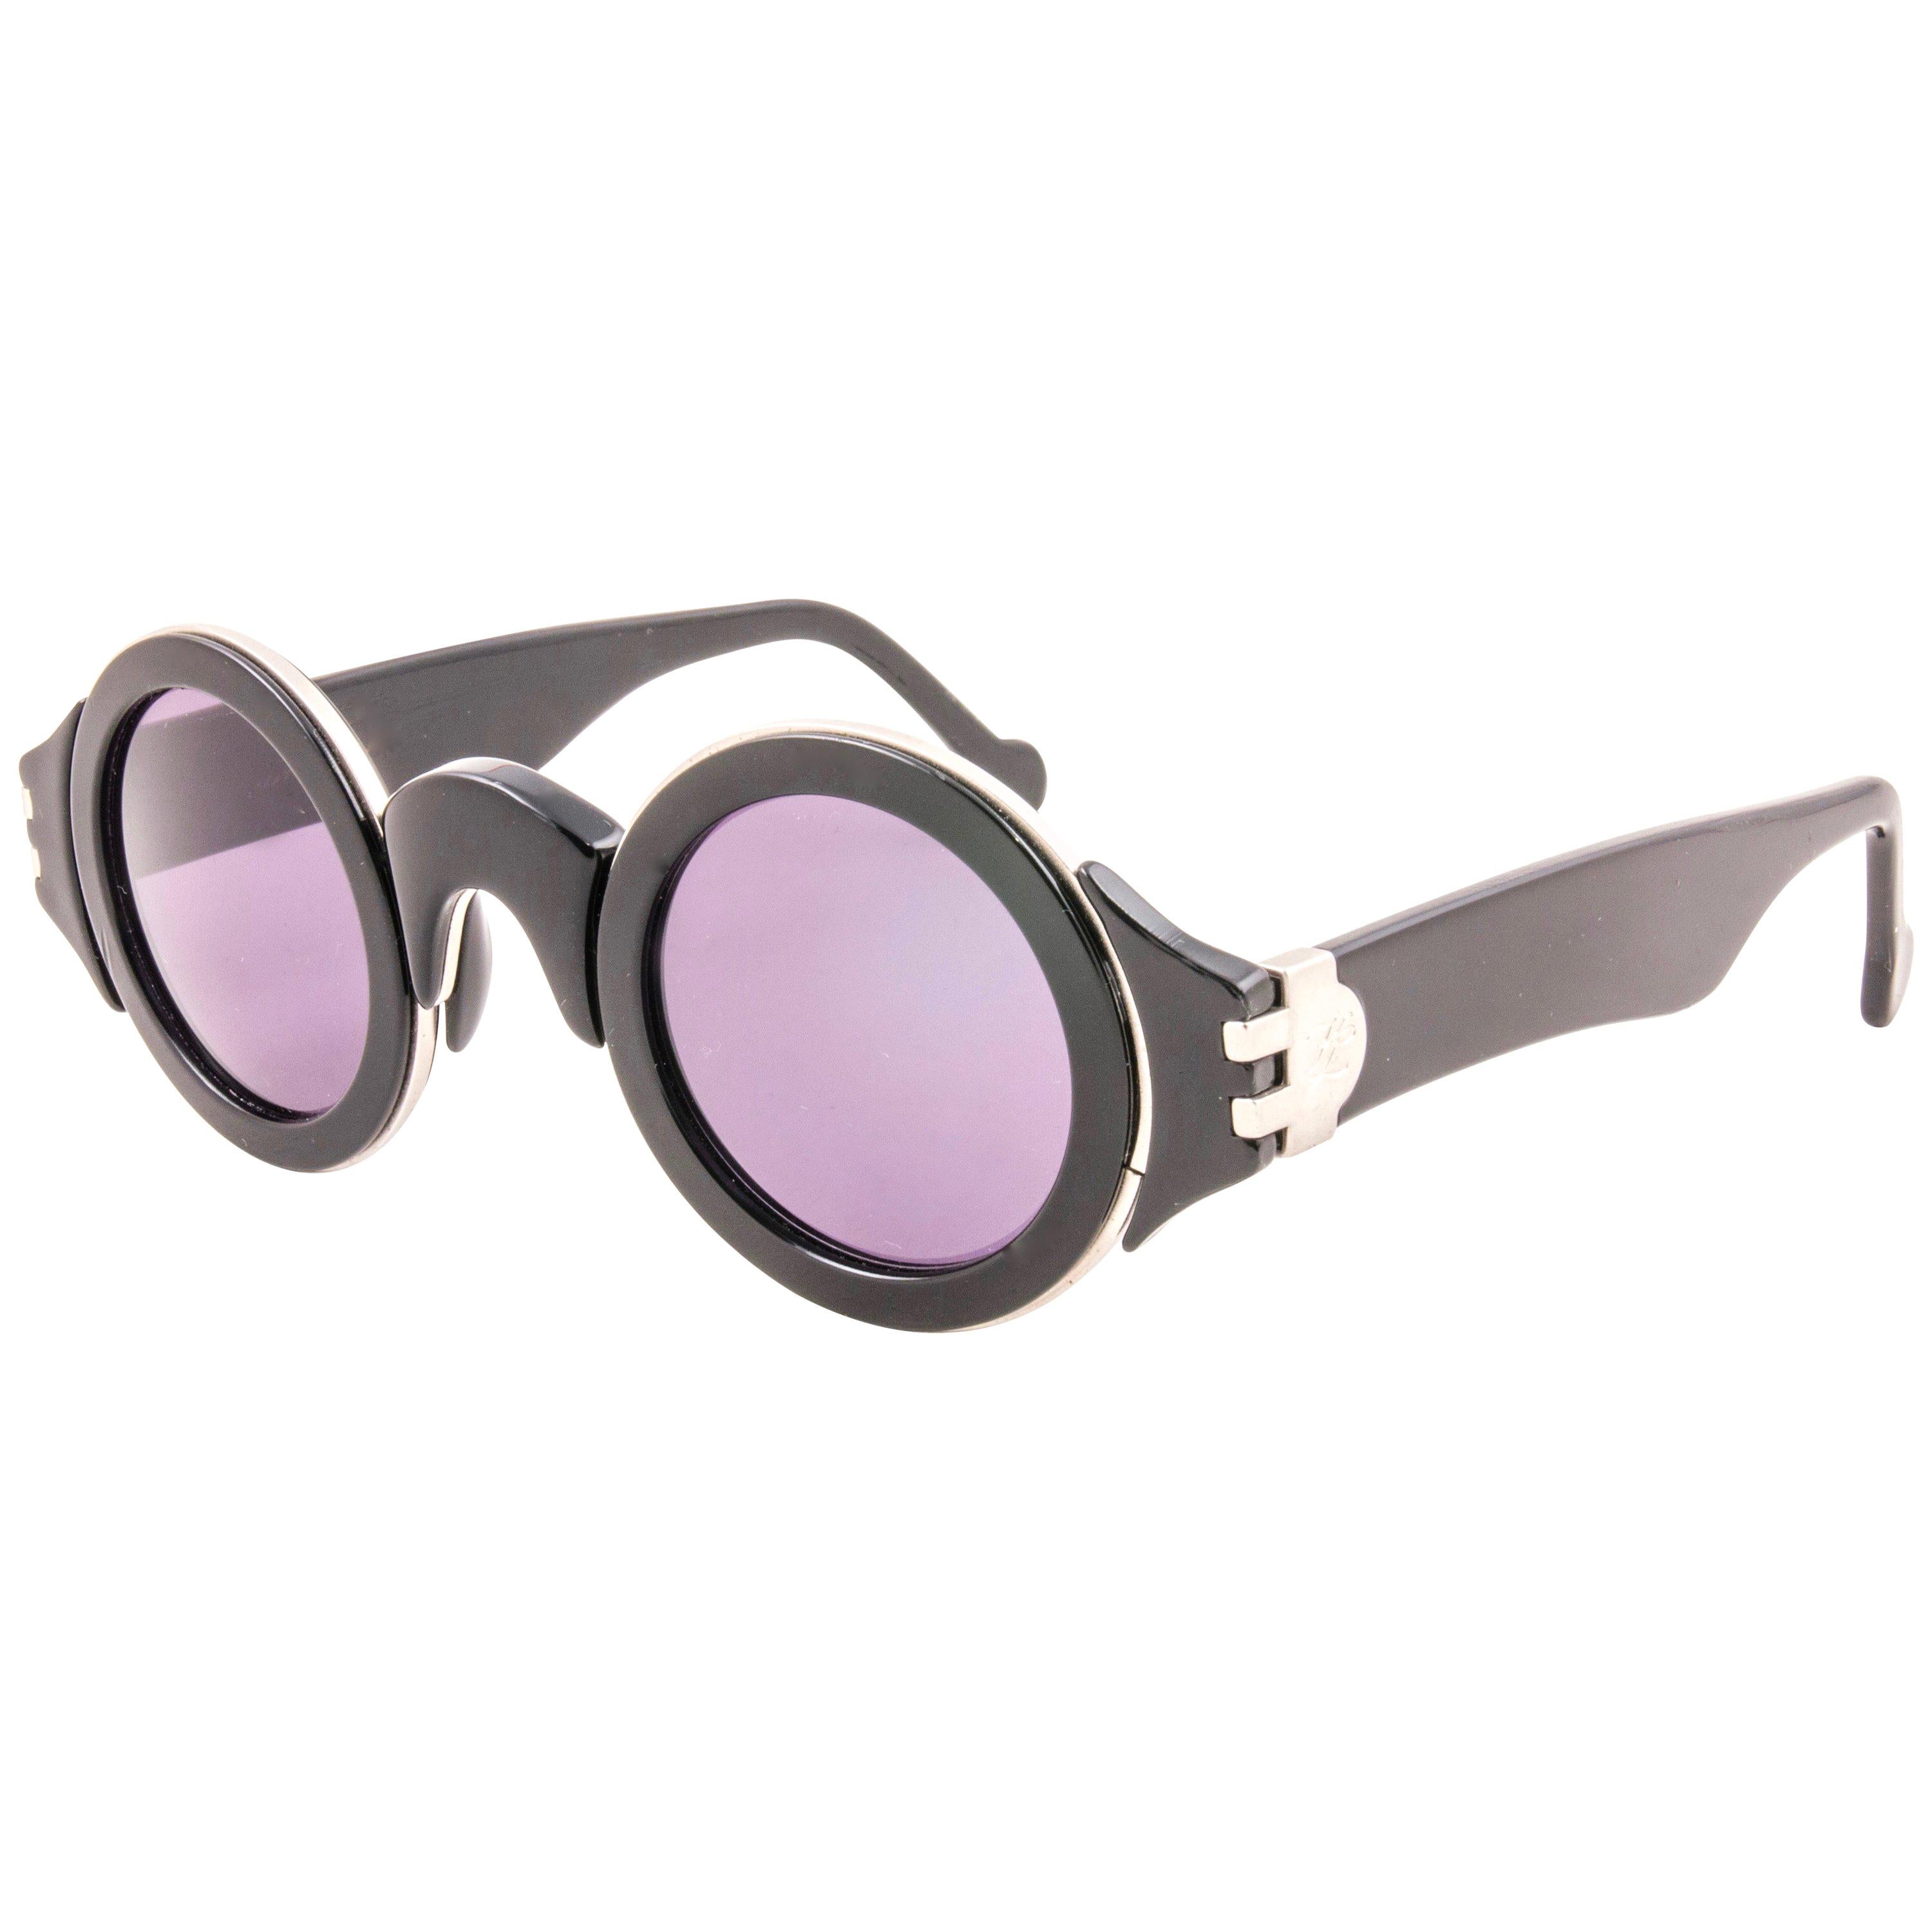 Striking pair of vintage Karl Lagerfeld 117 Round black & silver inserts sunglasses sporting a spotless pair of grey lenses.   

This pair of vintage Karl Lagerfeld is a rare sought after piece not to miss out!

Please note that this item may show